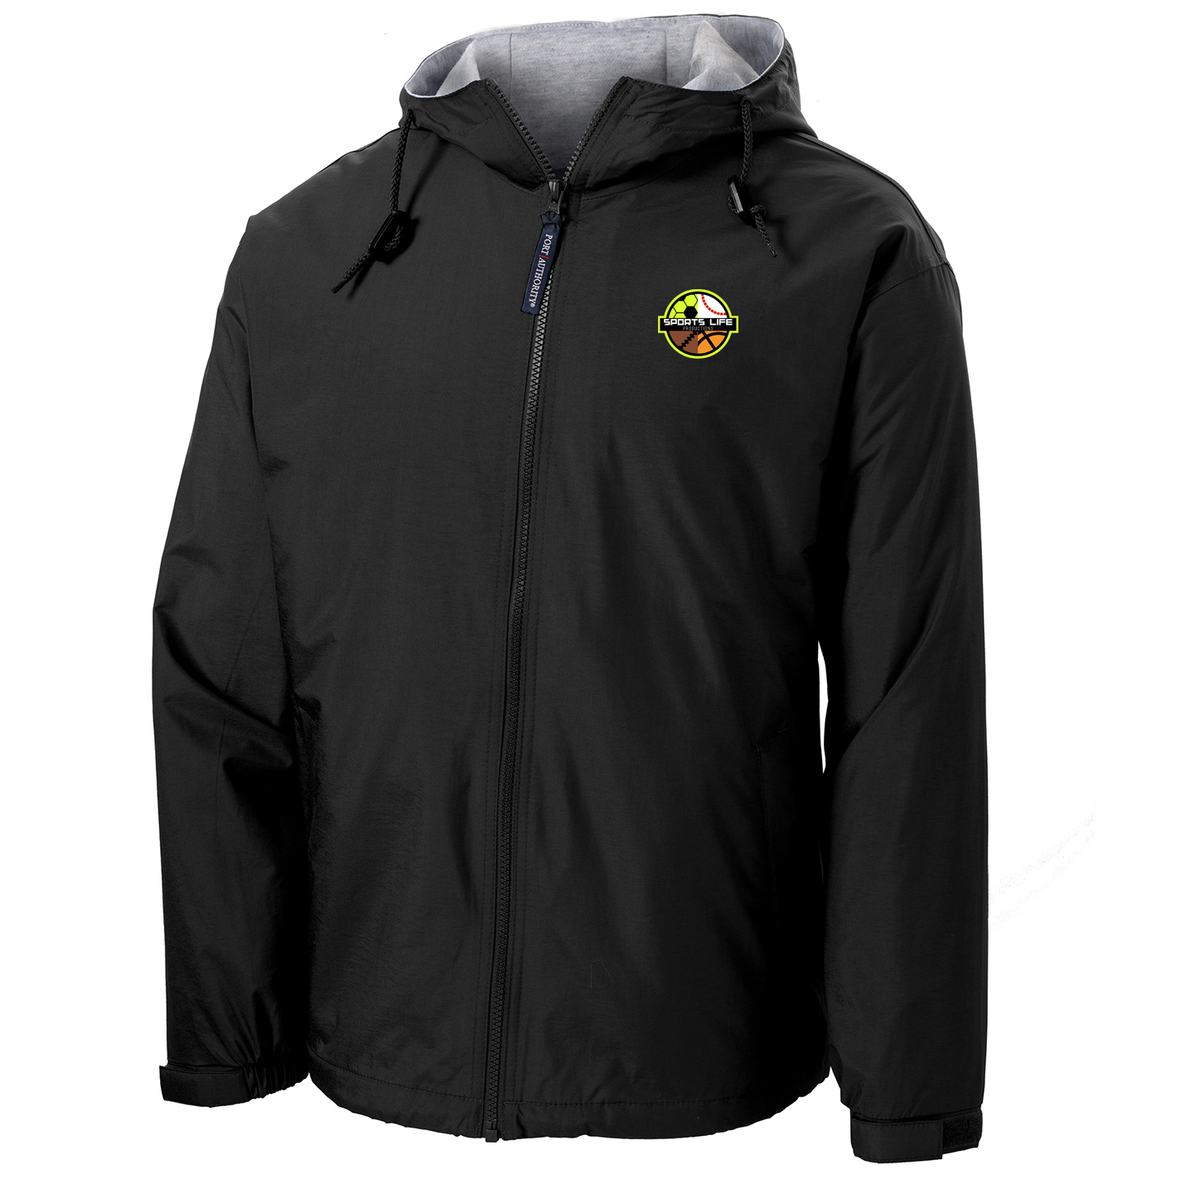 Sports Life Productions Hooded Jacket